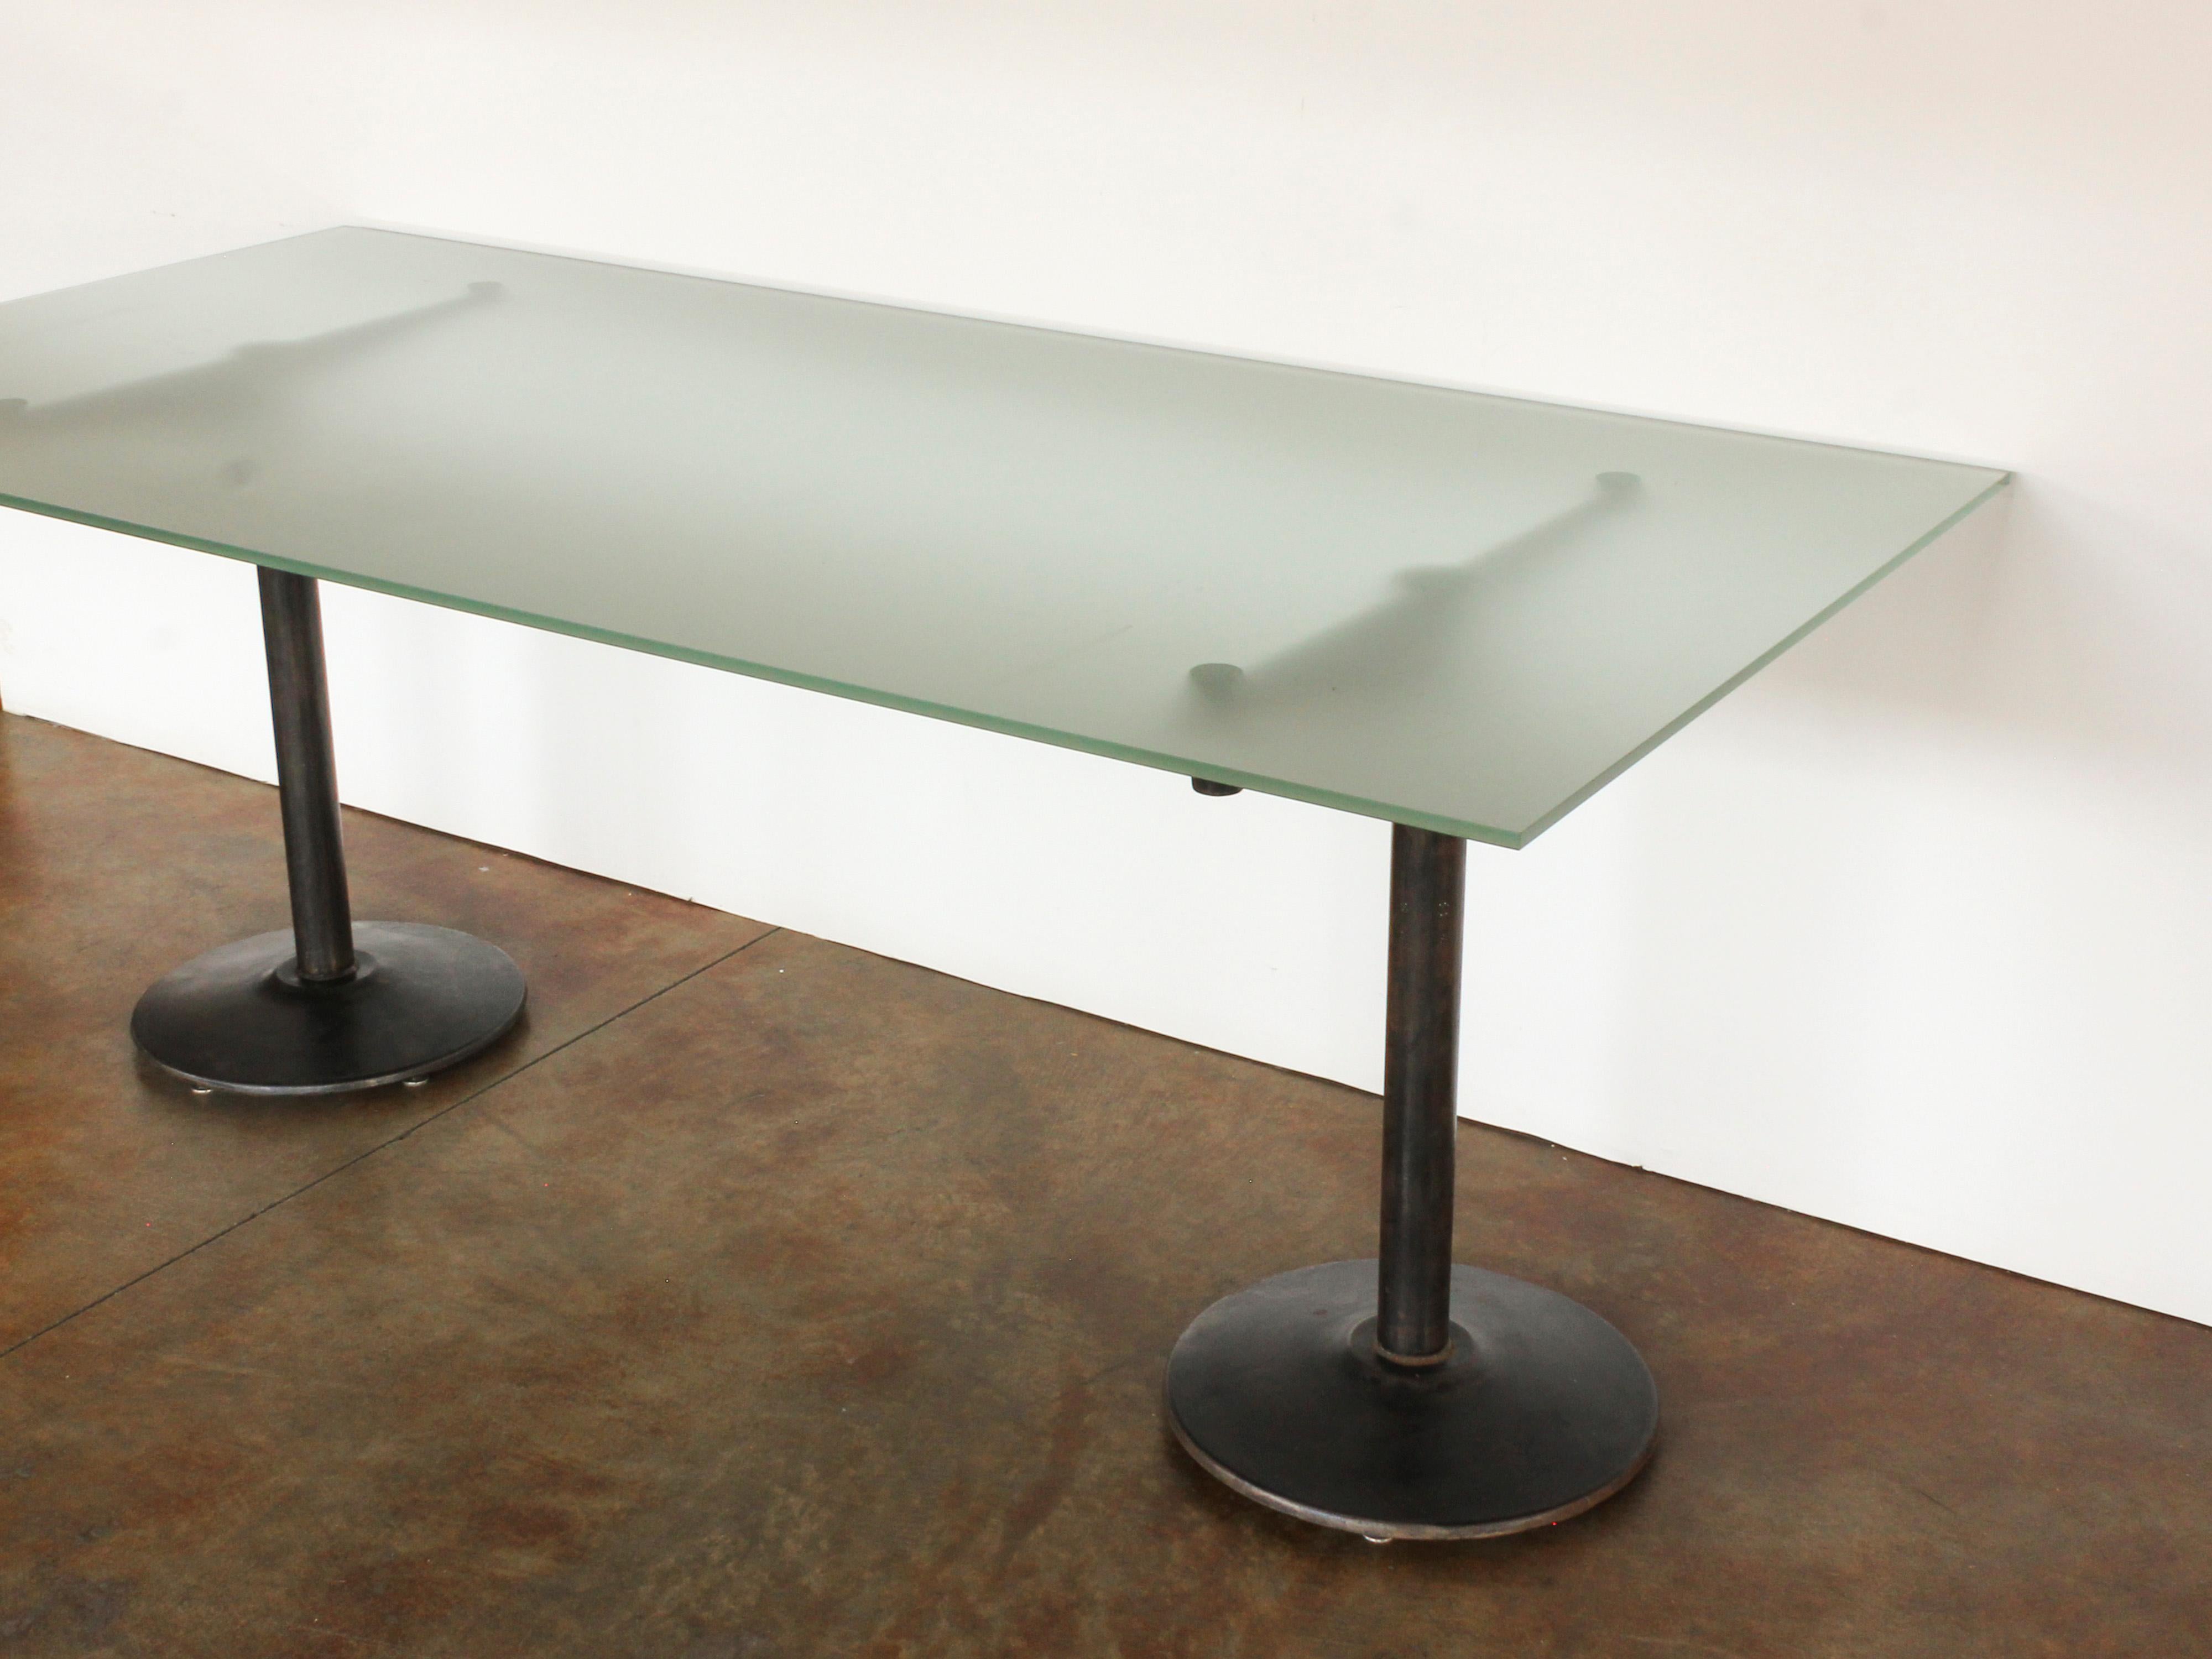 20th Century 20th c. American Industrial Style Iron Pedestal Table with Frosted Glass Top For Sale